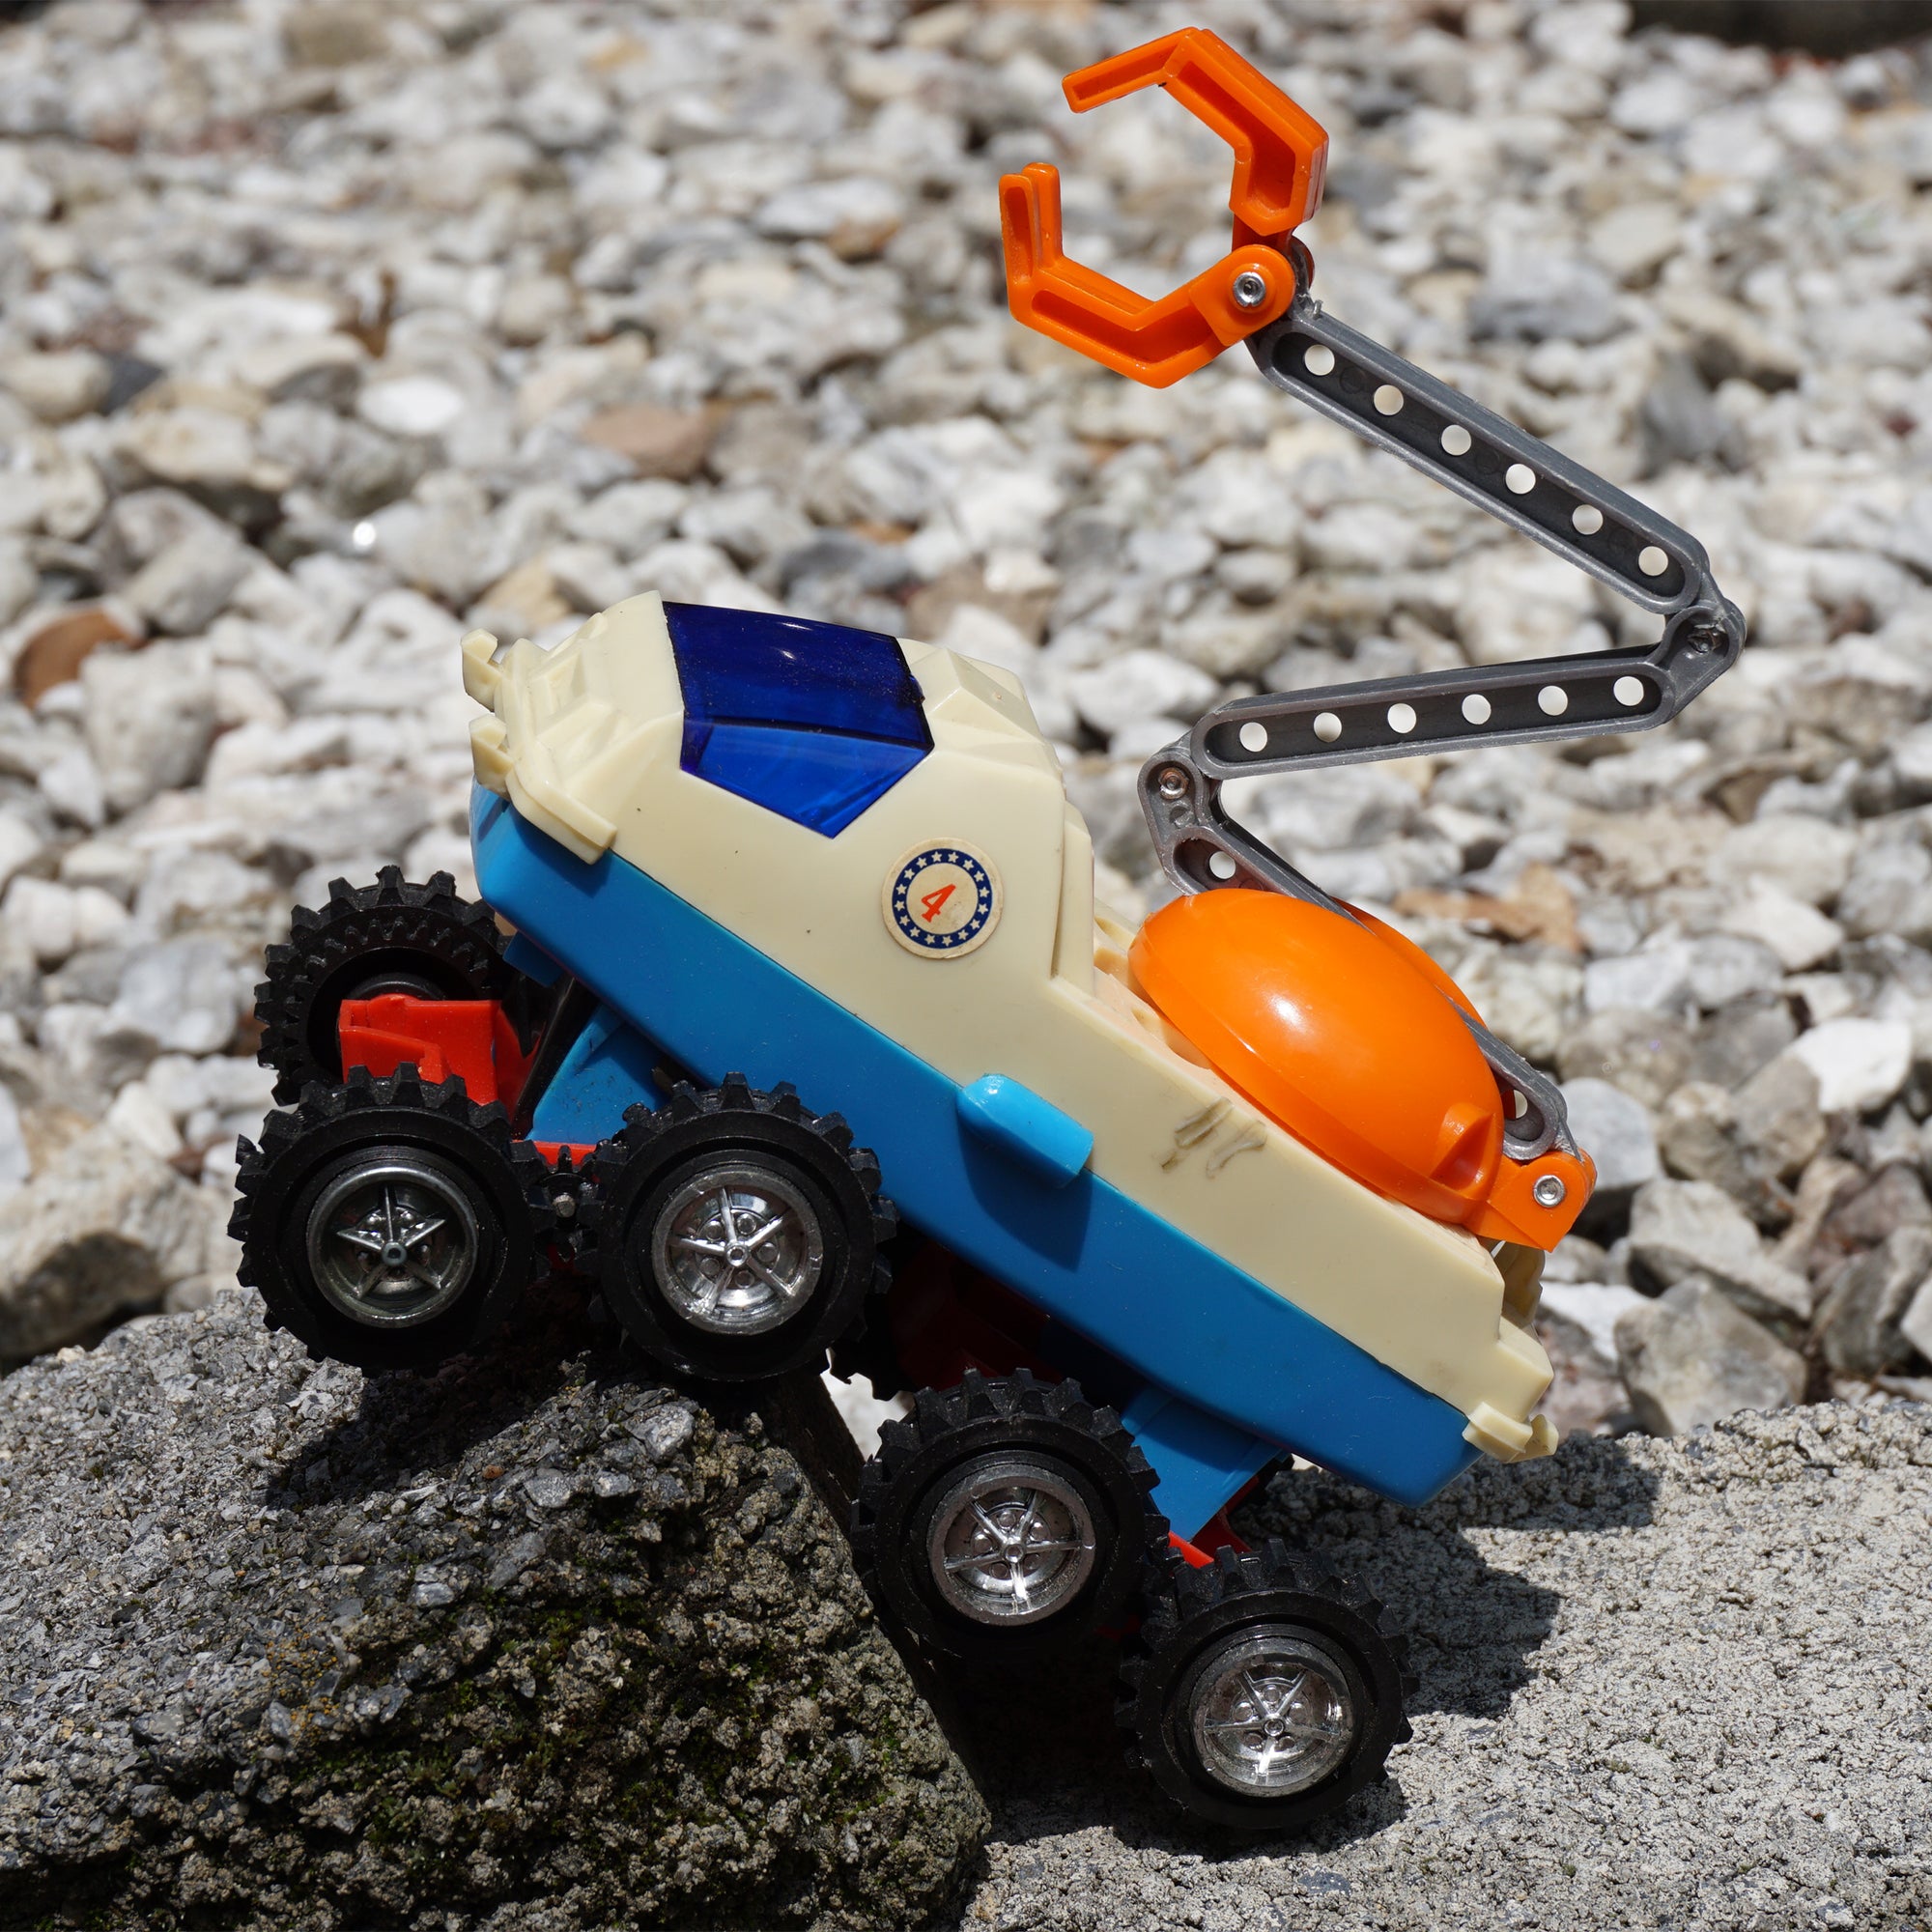 1970s Rare Vintage SPACE ROVER #4 Space Craft Grabber Climbing 8-Wheel Vehicle